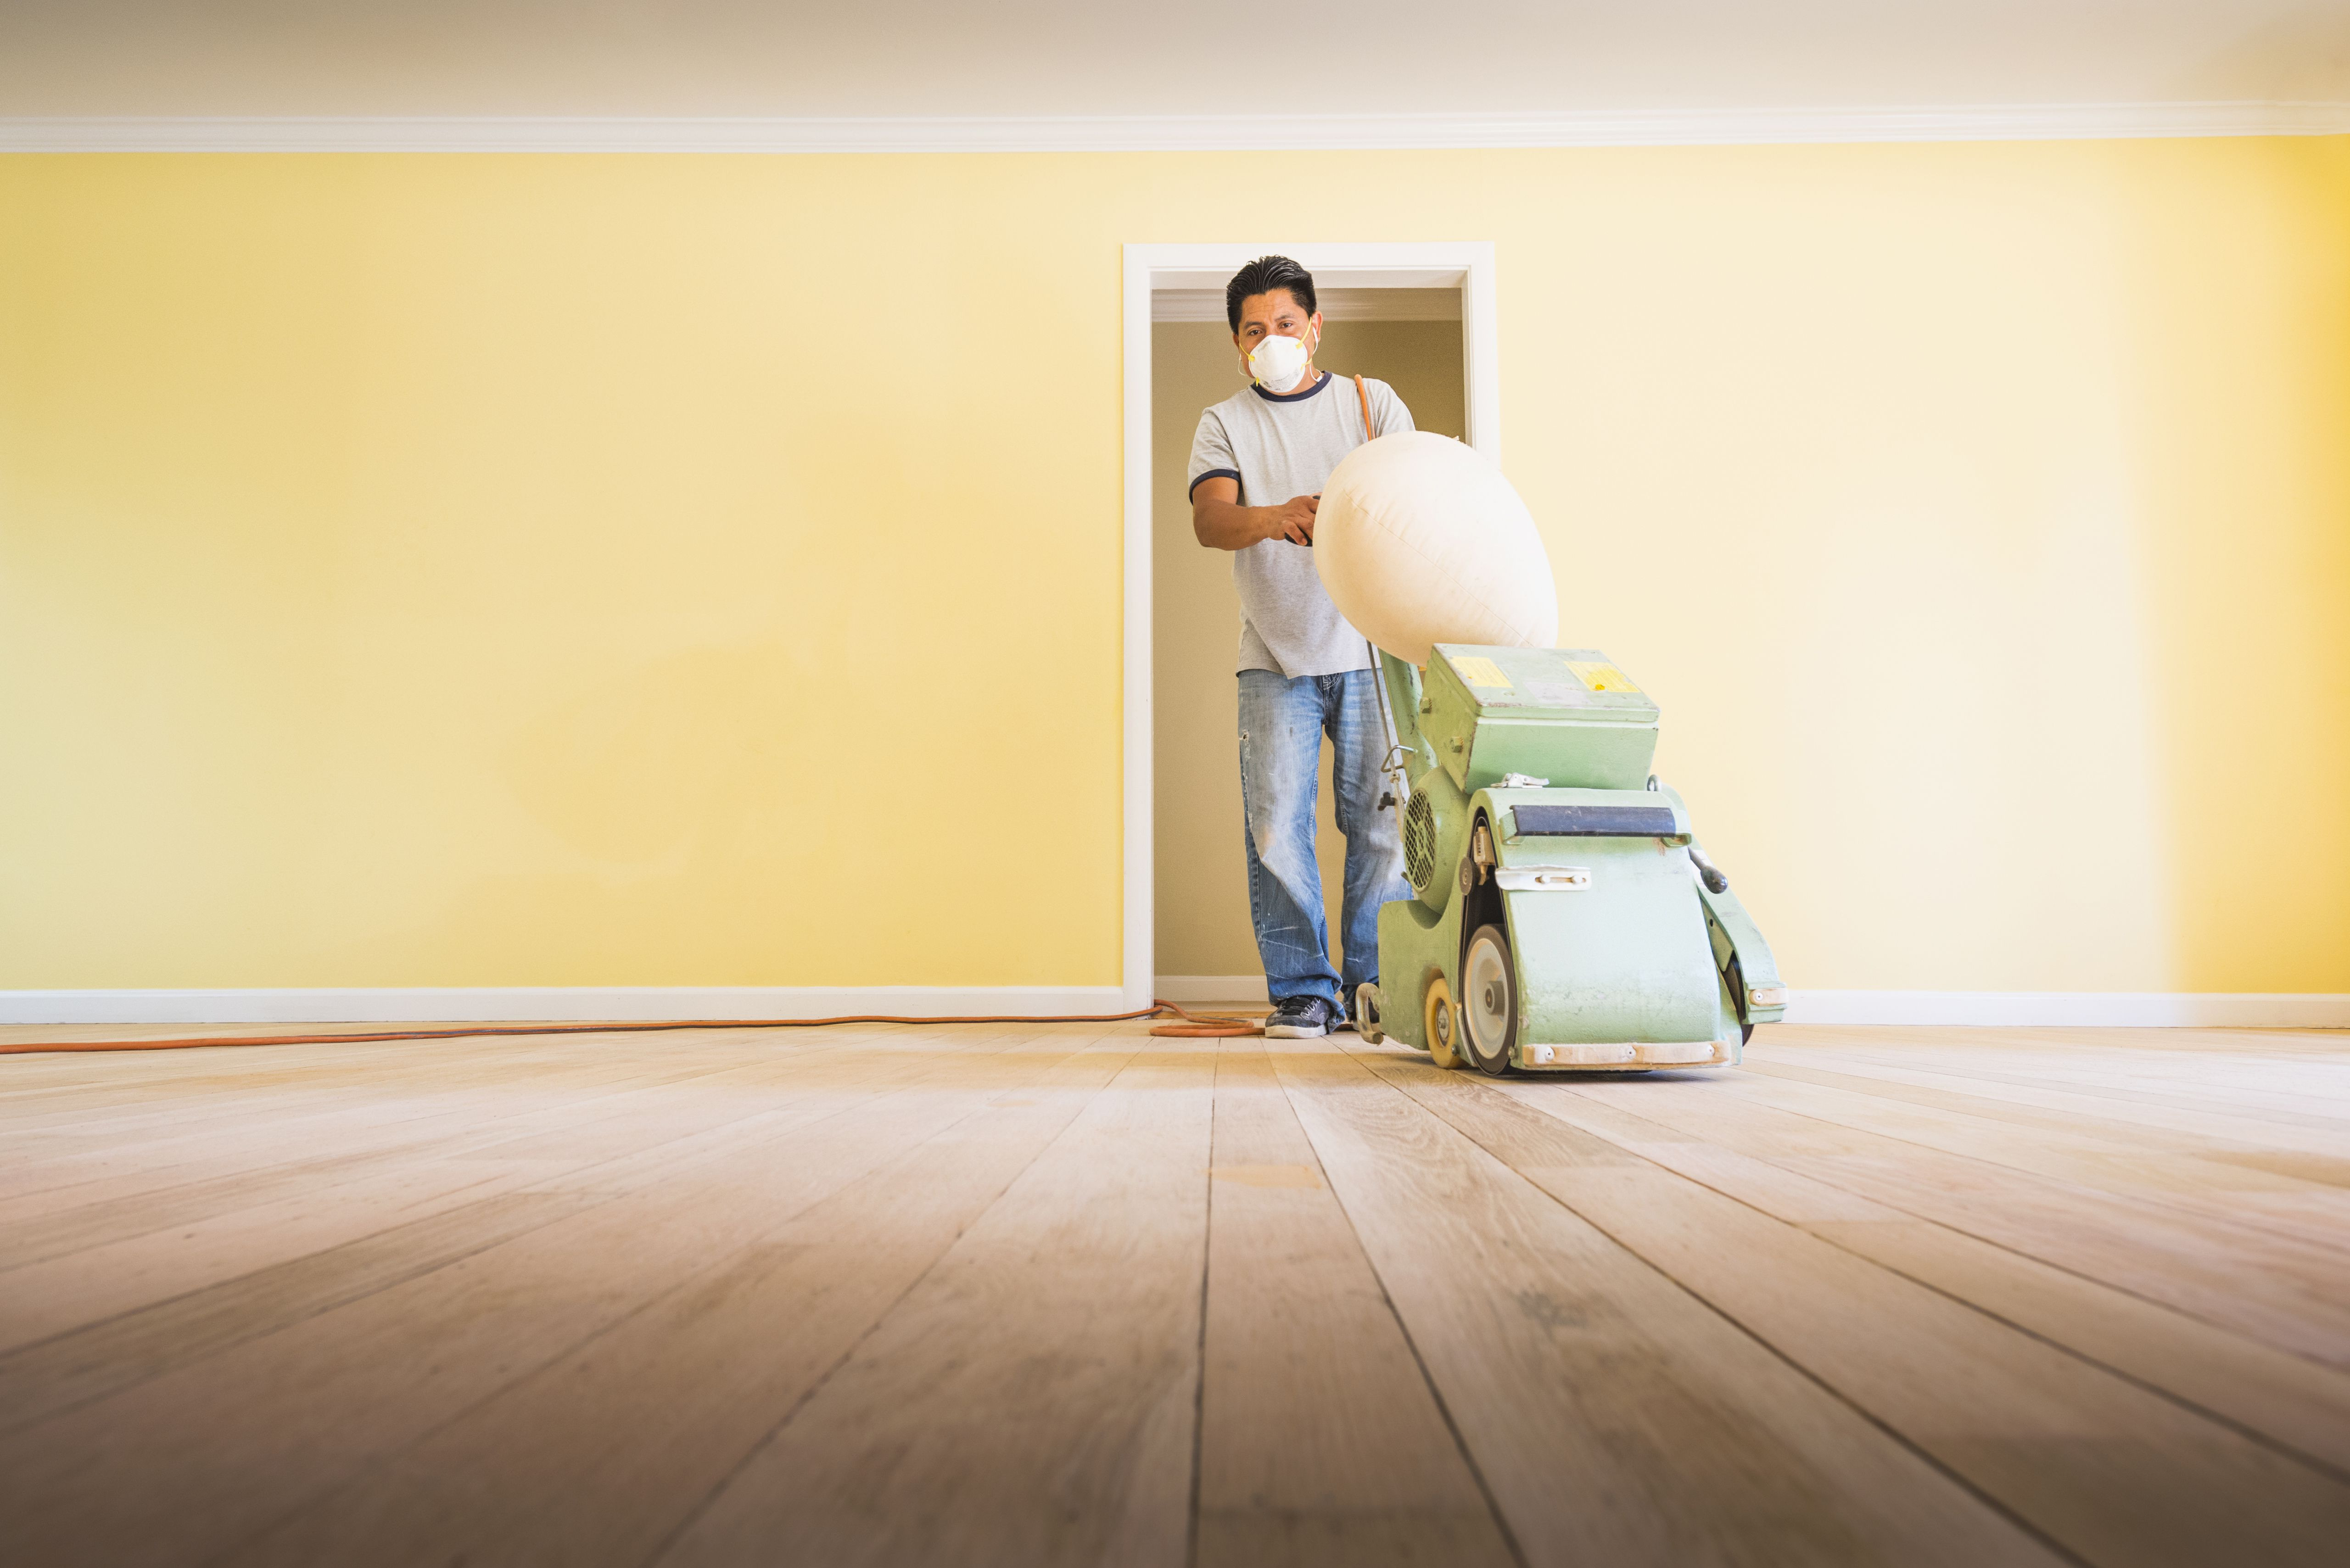 cost to resurface hardwood floors of should you paint walls or refinish floors first within floorsandingafterpainting 5a8f08dfae9ab80037d9d878